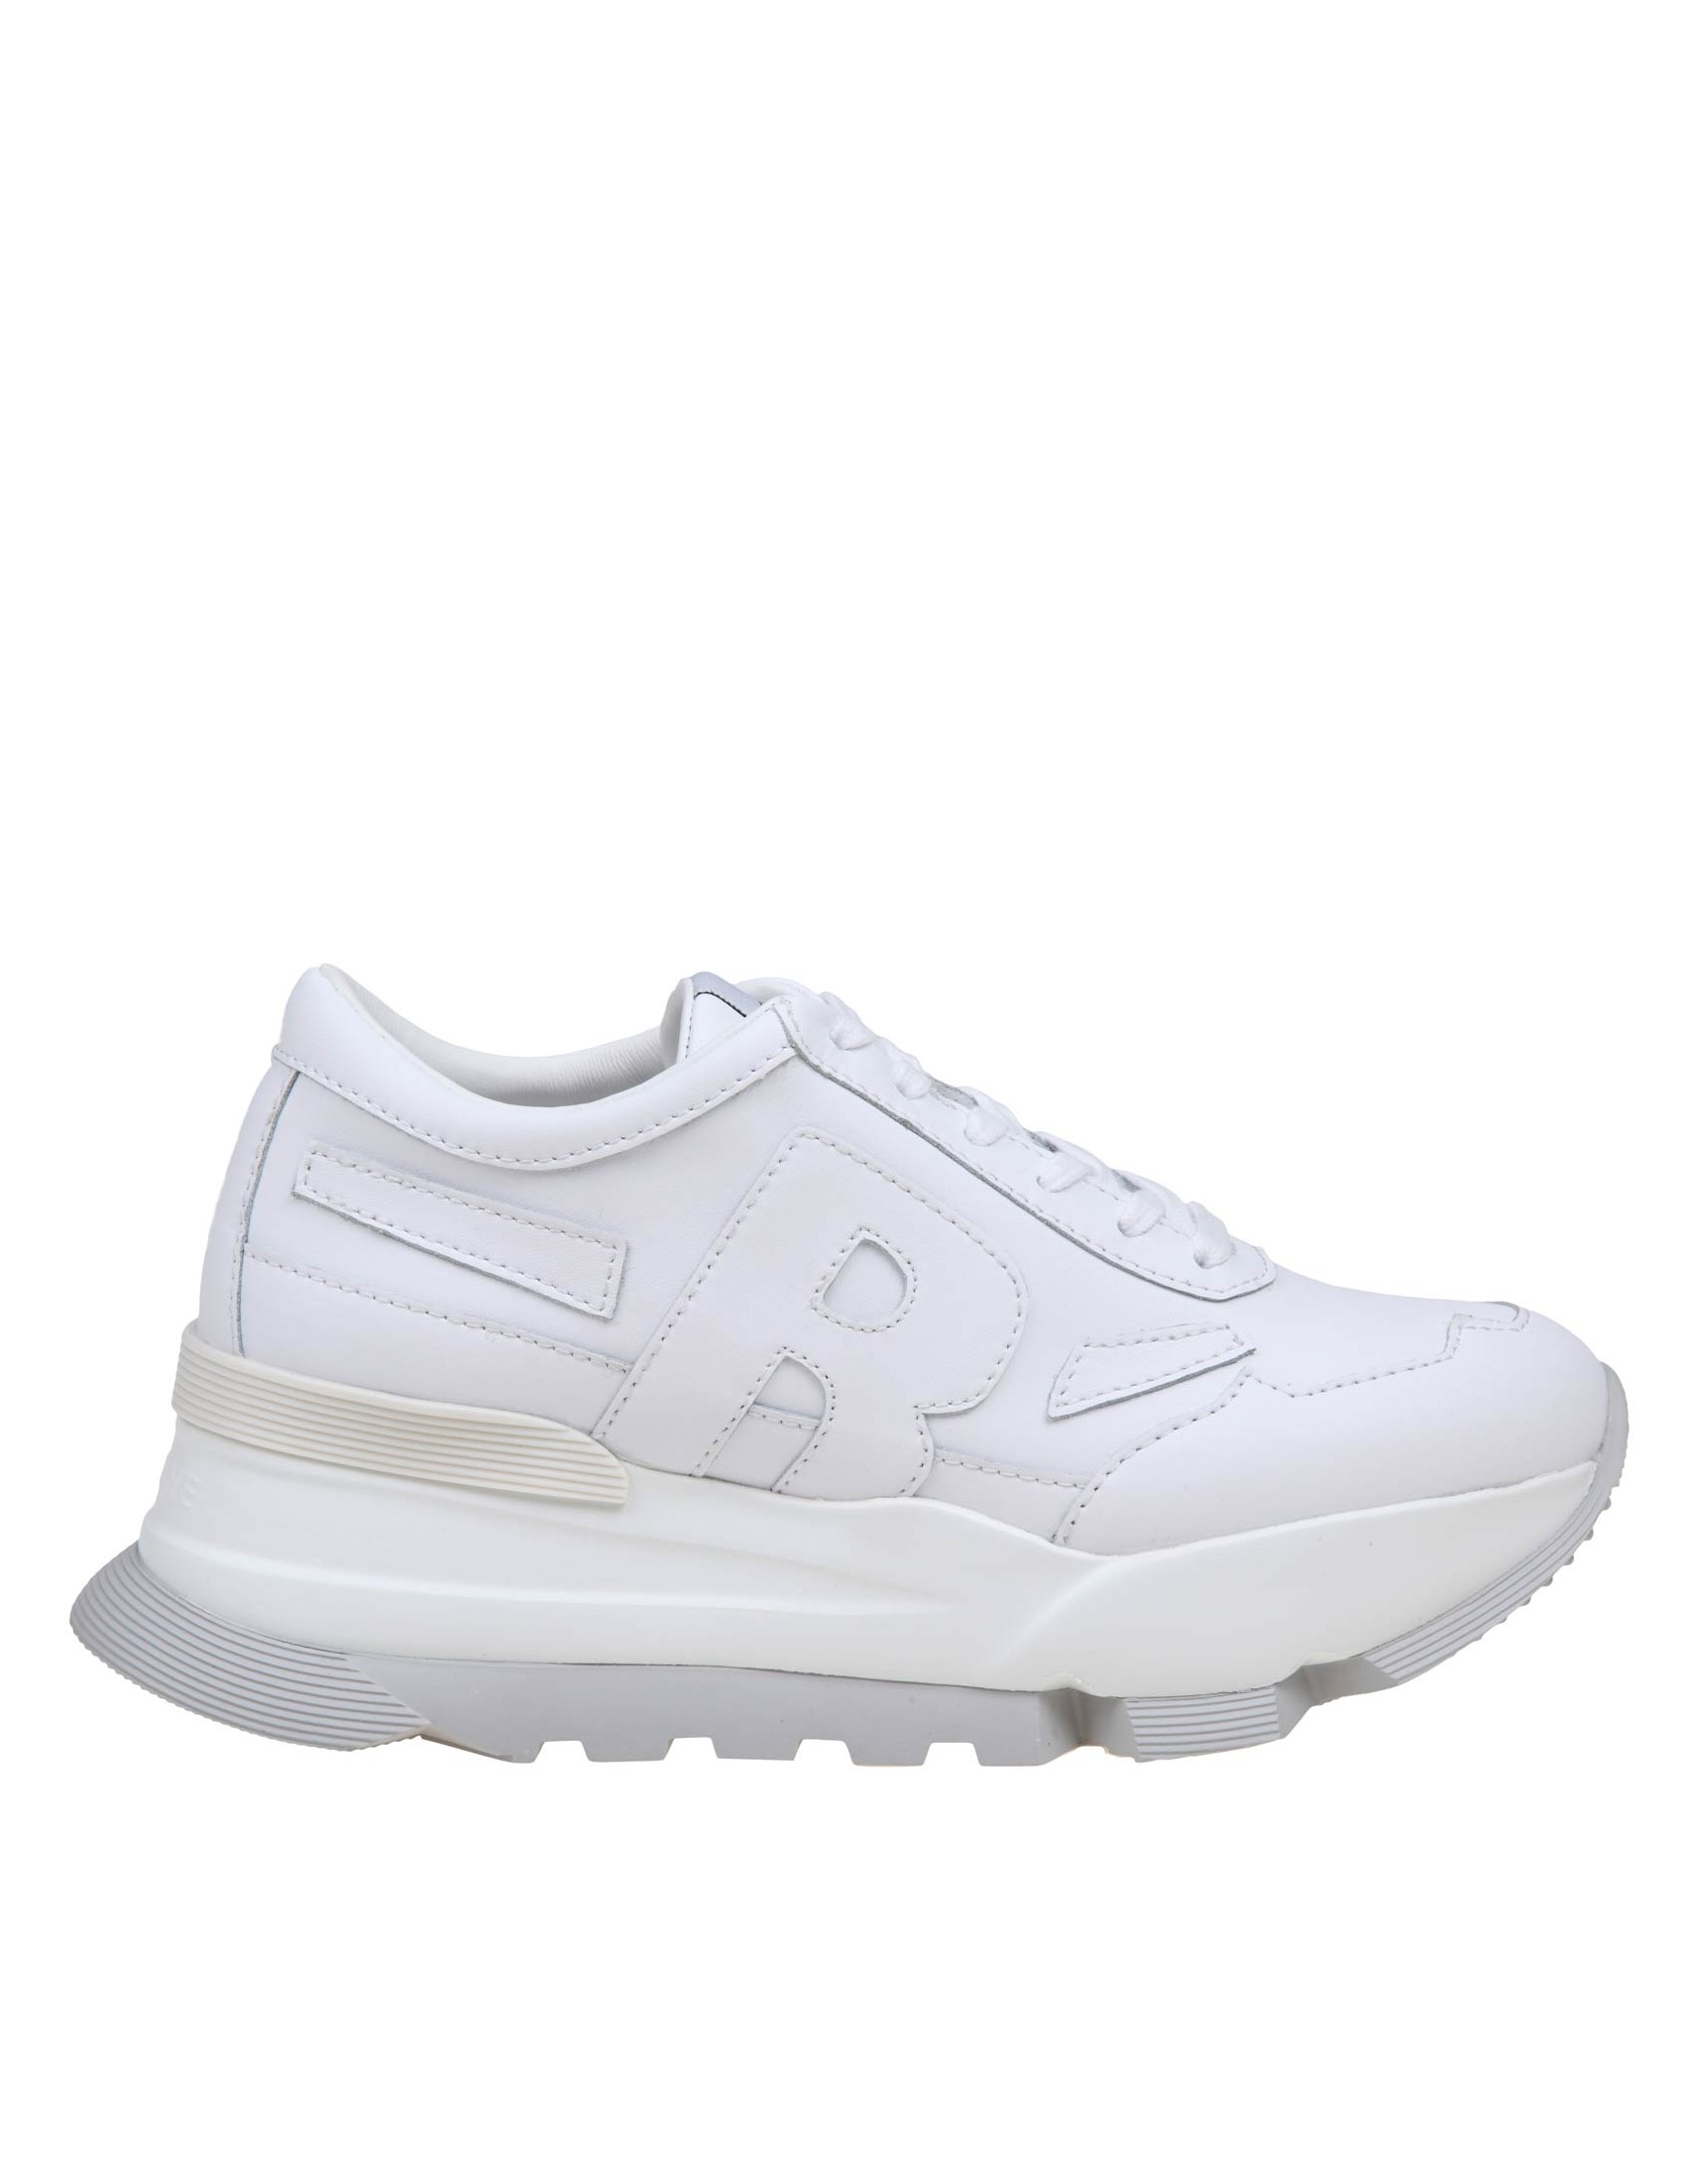 RUCOLINE SNEAKERS IN PELLE COLORE BIANCO